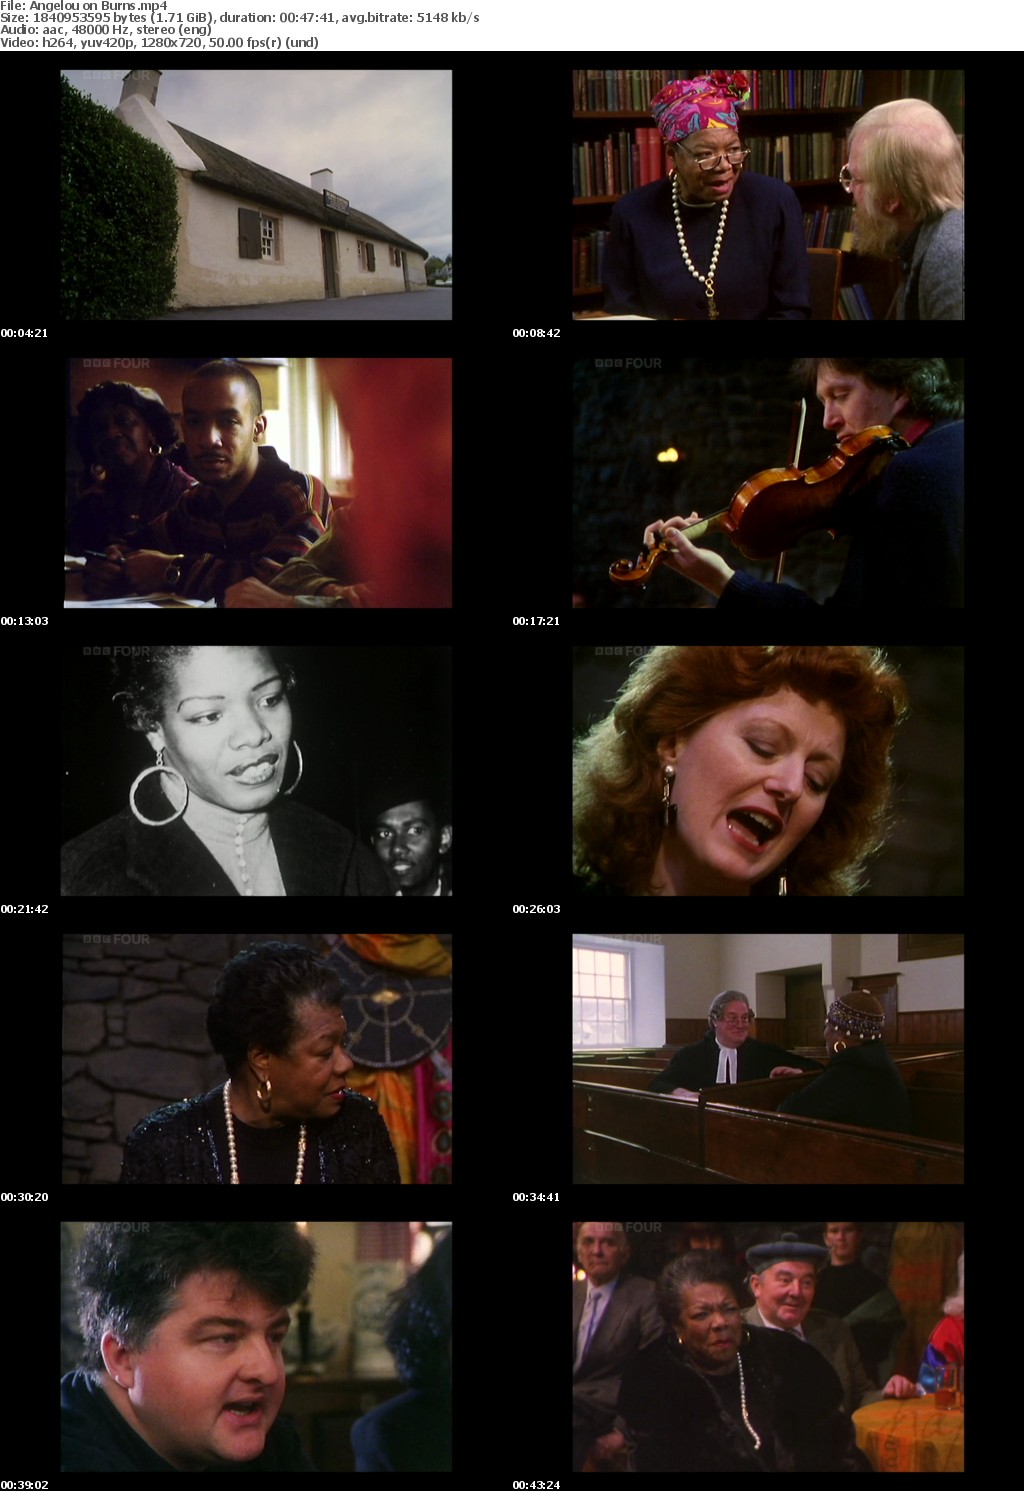 Angelou on Burns (BBC 1996) (1280x720p HD, 50fps, soft Eng subs)